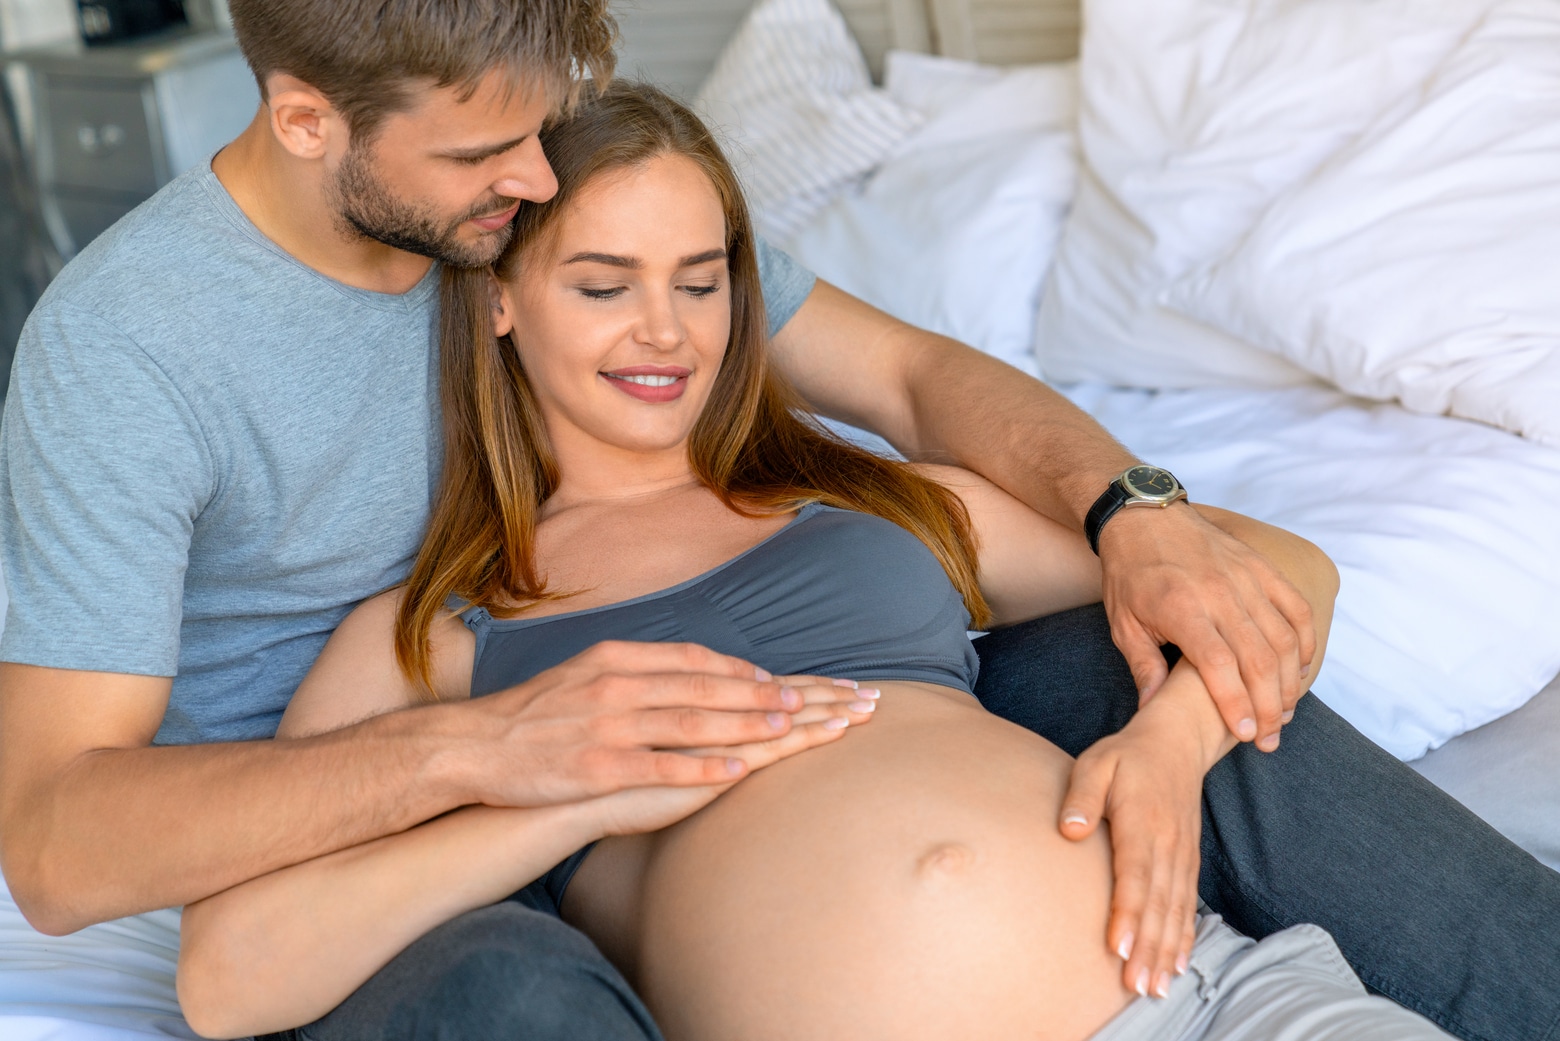 couple with pregnant woman relaxing on sofa together